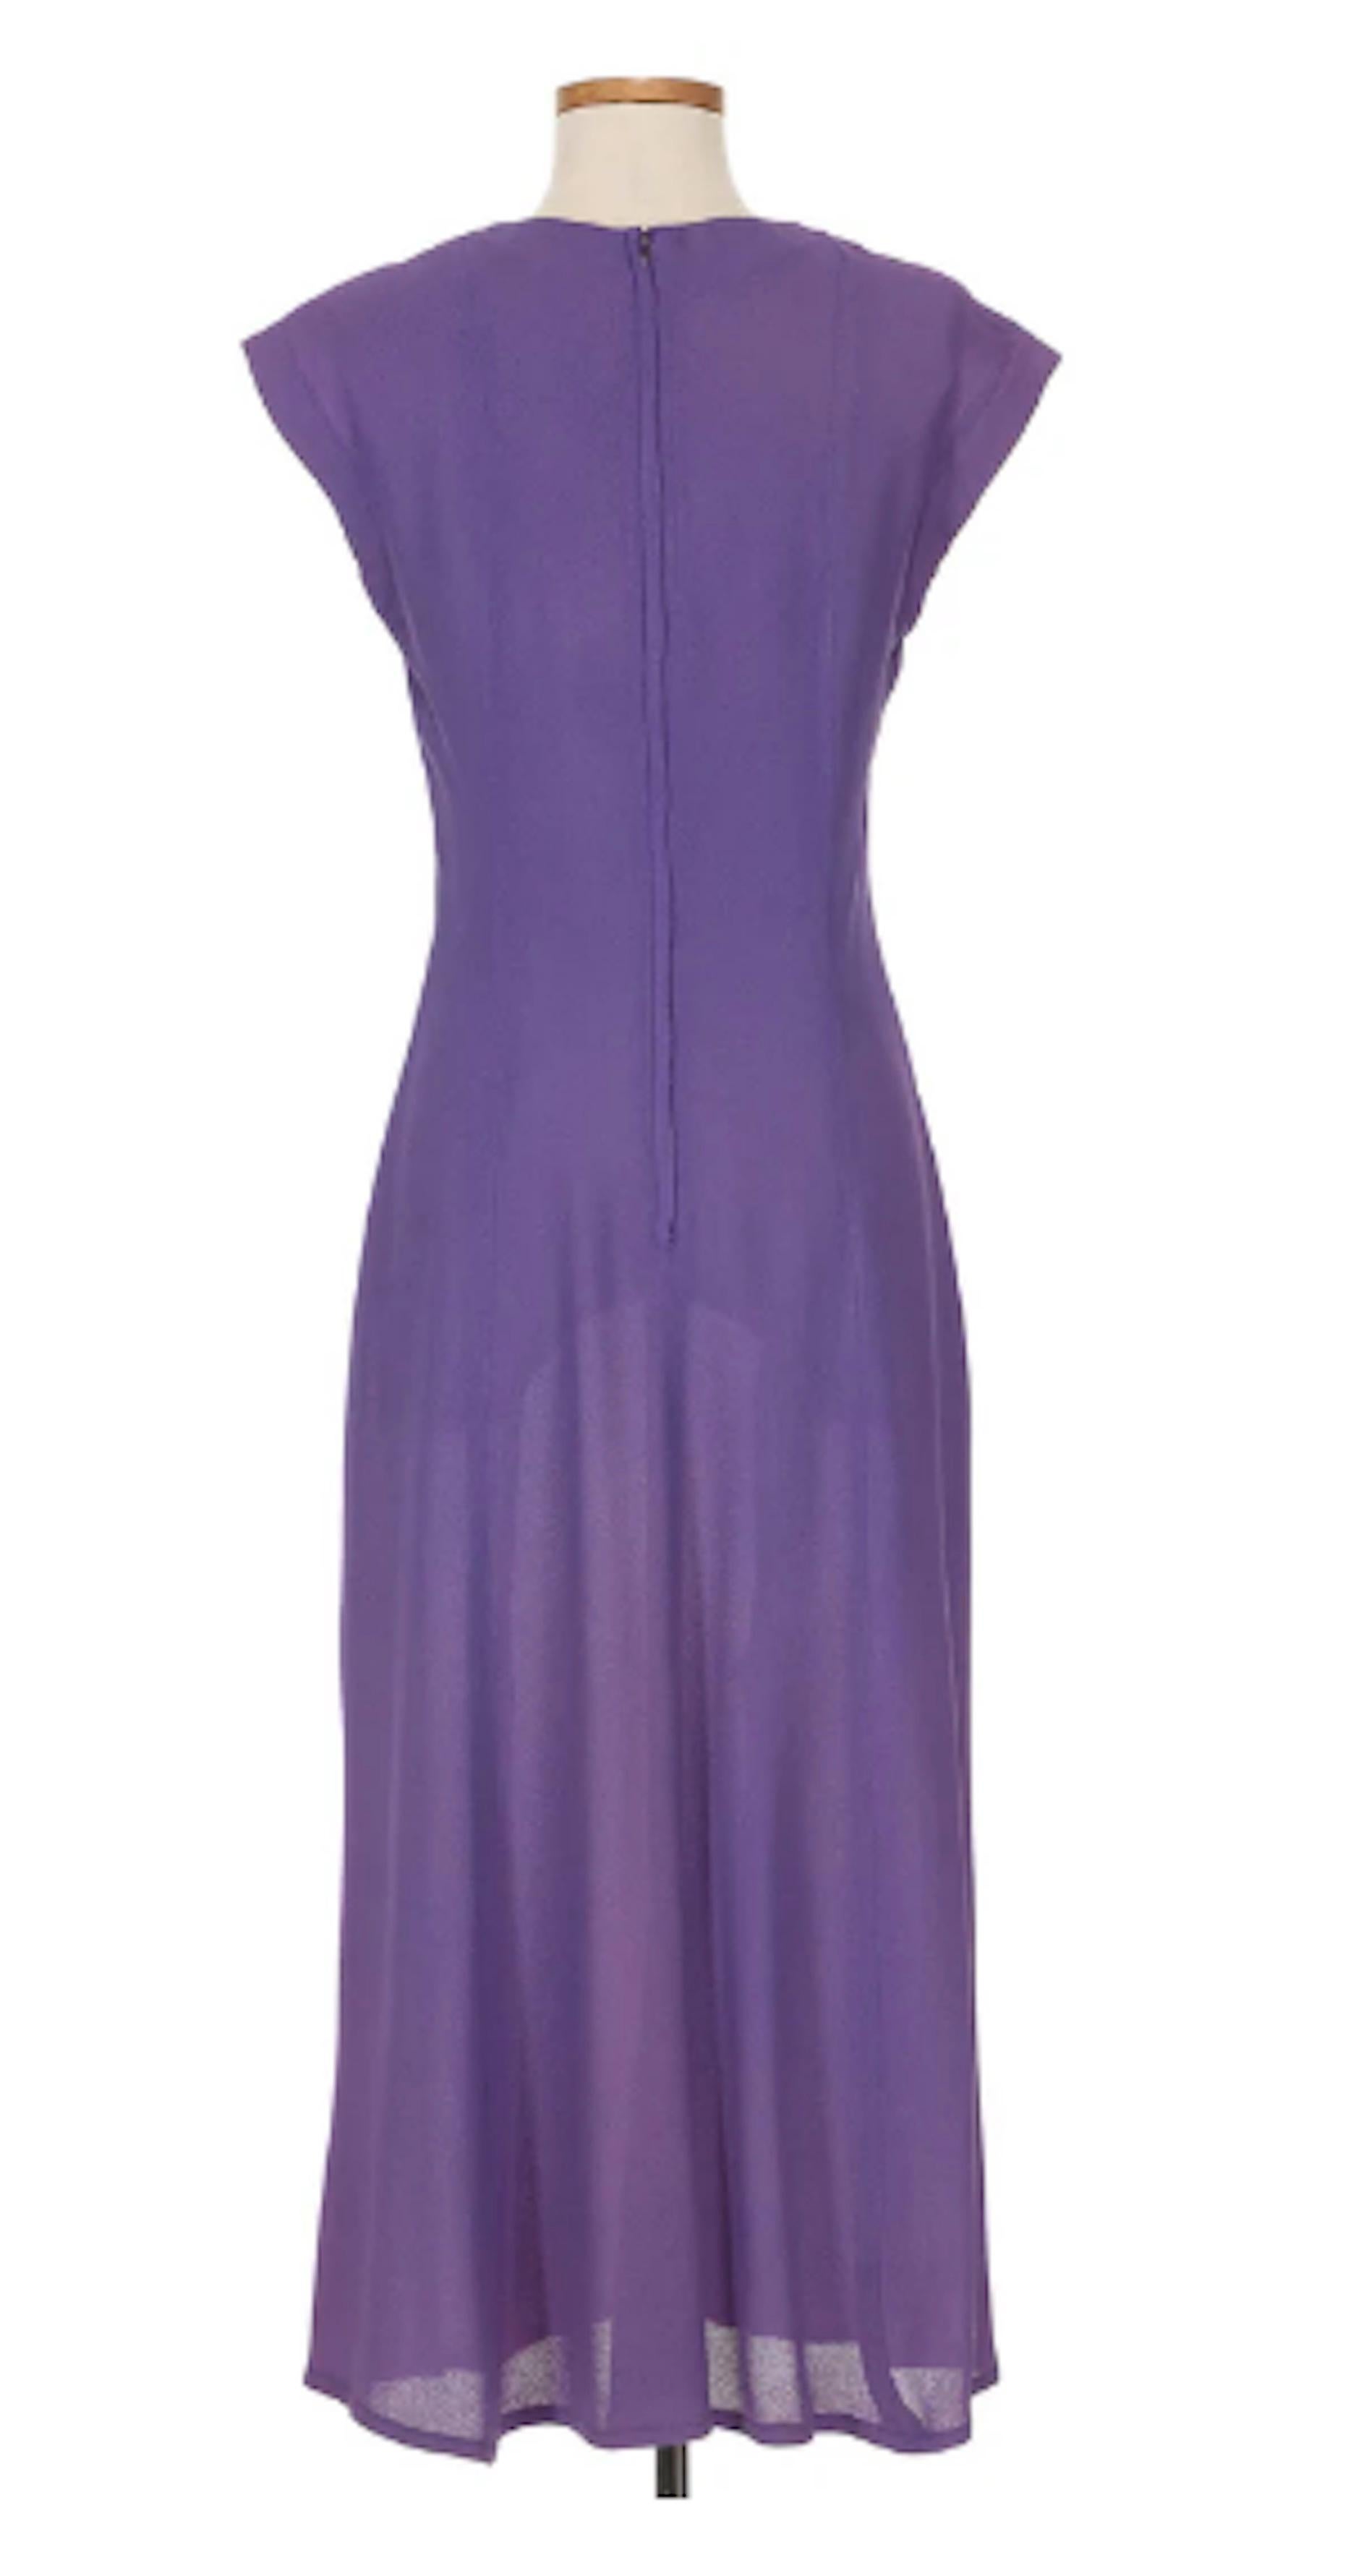 Ossie Clark for Radley 1970's Purple Dress. Ossie Clark gained recognition from his designs of the 60s London fashion scene. Along with his wife Celia Birtwell, Clark created pieces with bold patterns and daring colors. This dress is a playful &